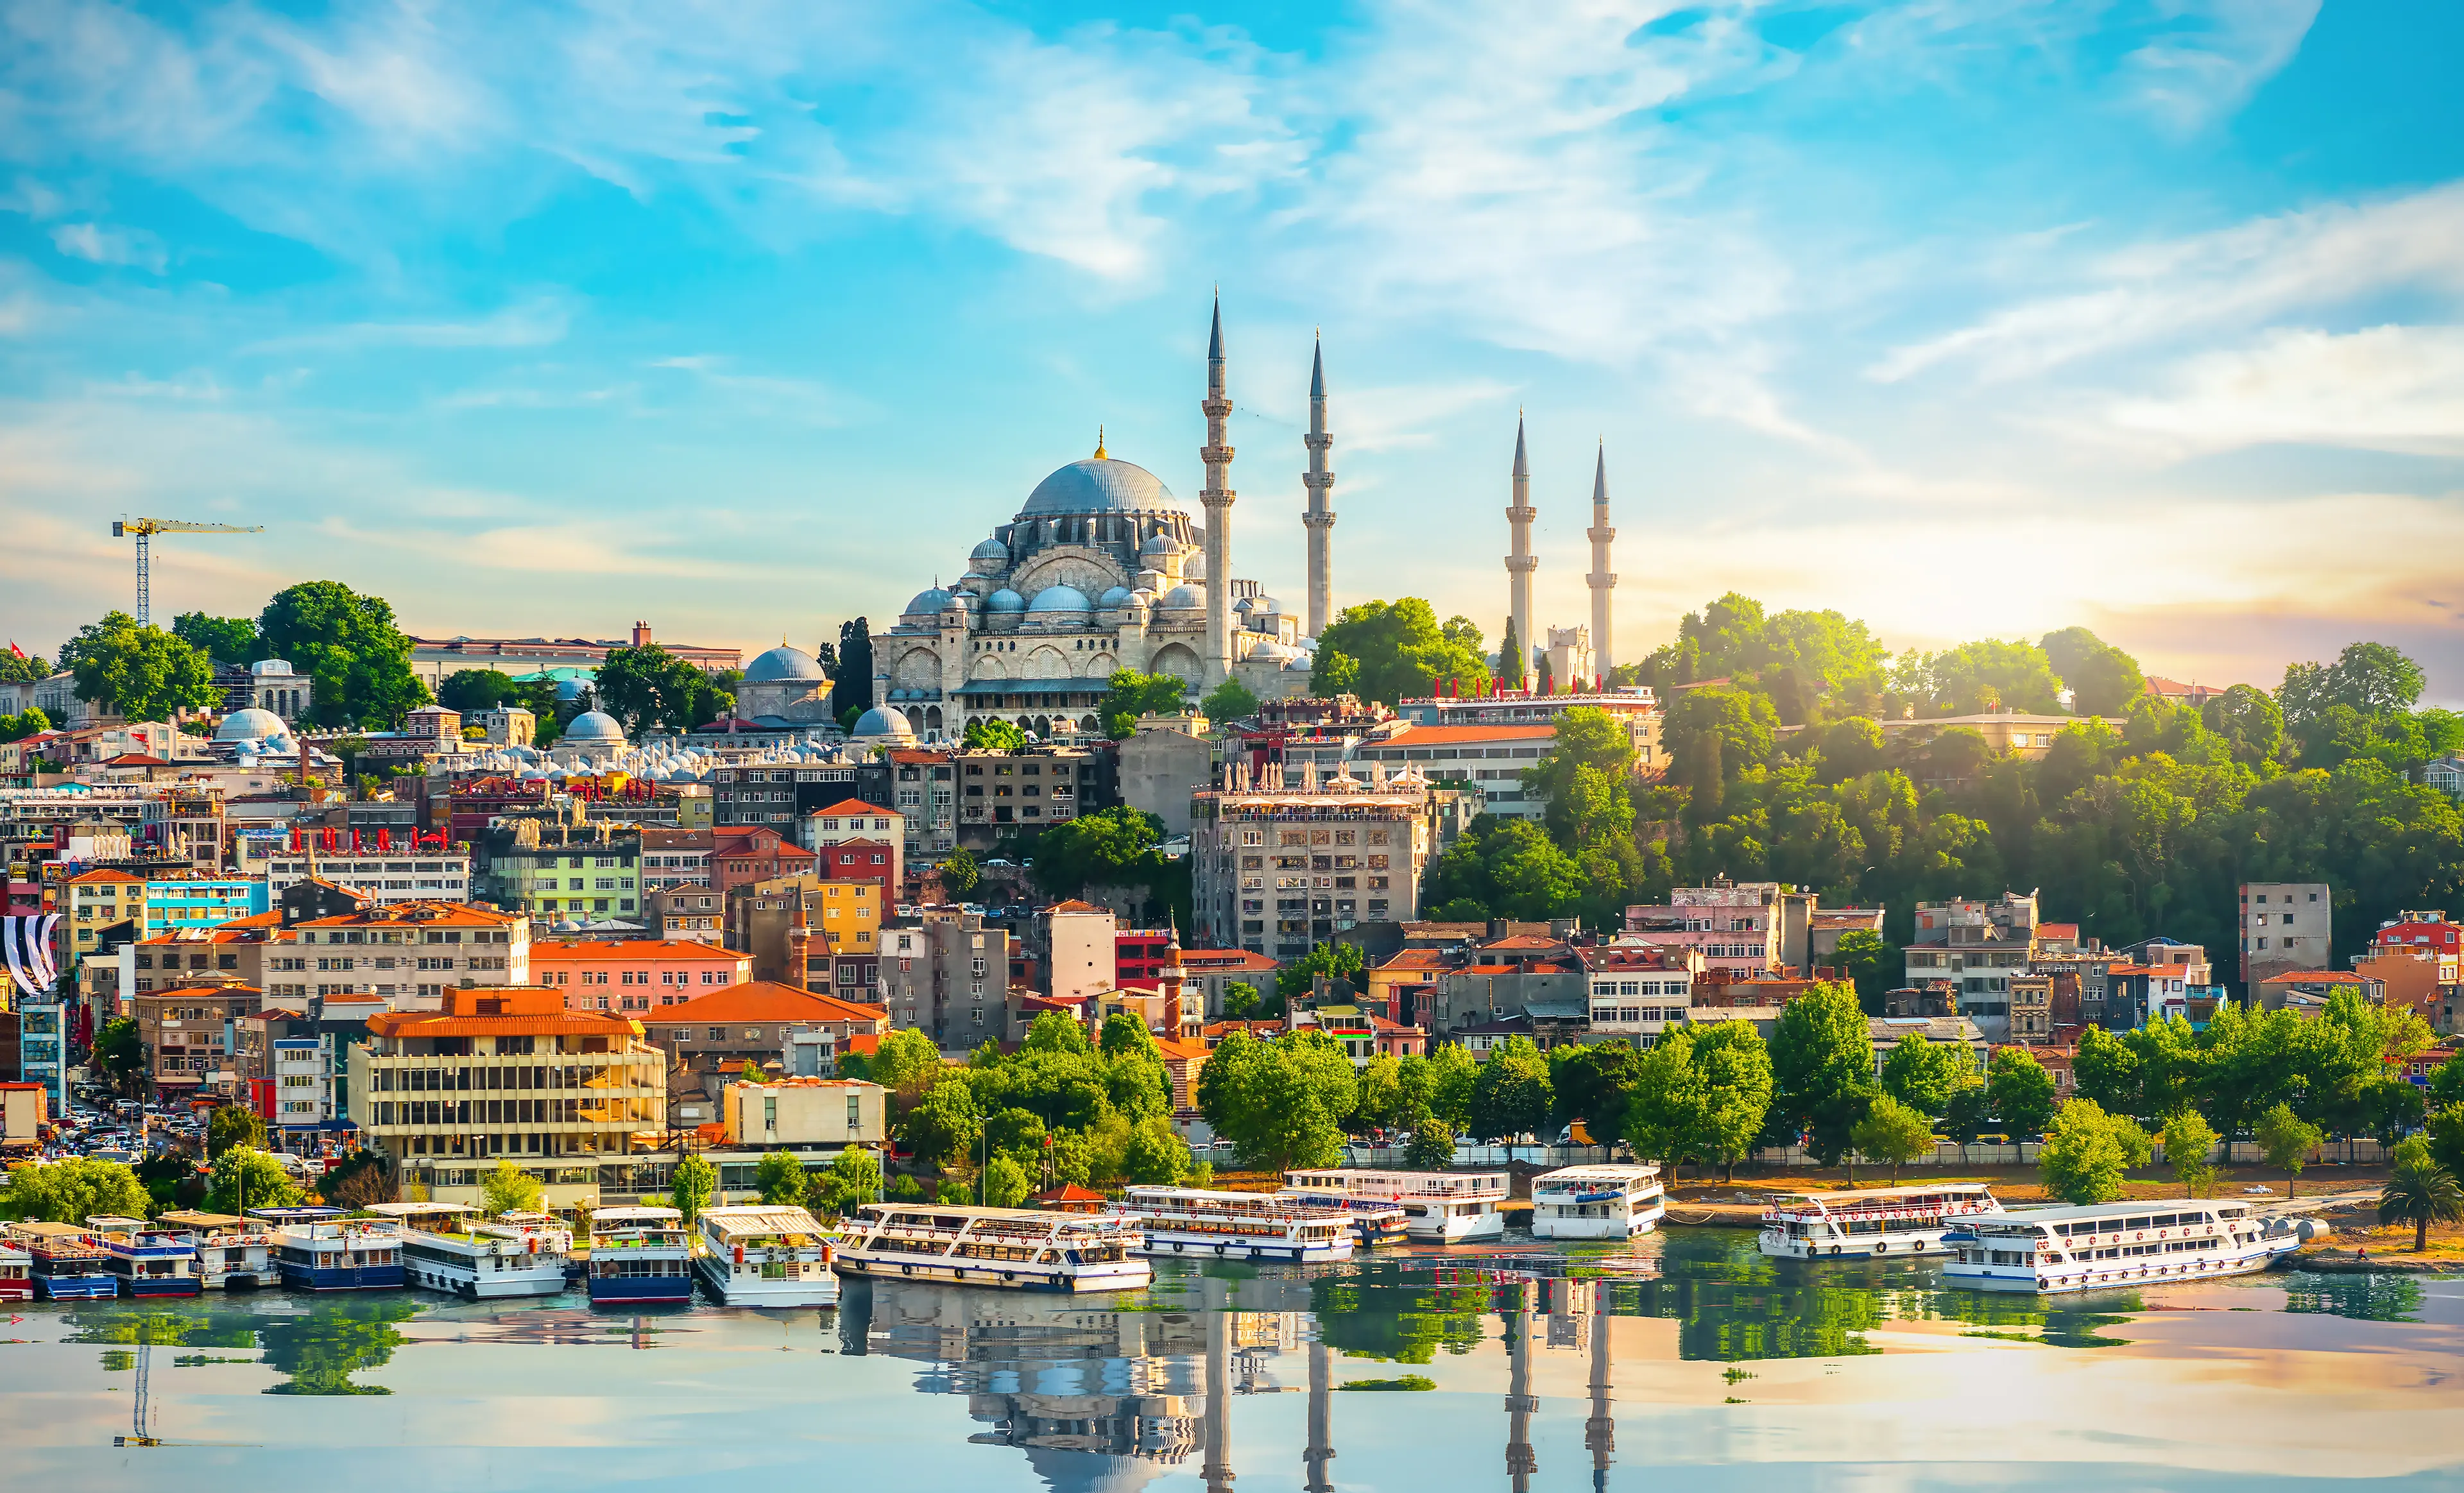 4-Day Istanbul Adventure & Sightseeing Tour with Friends